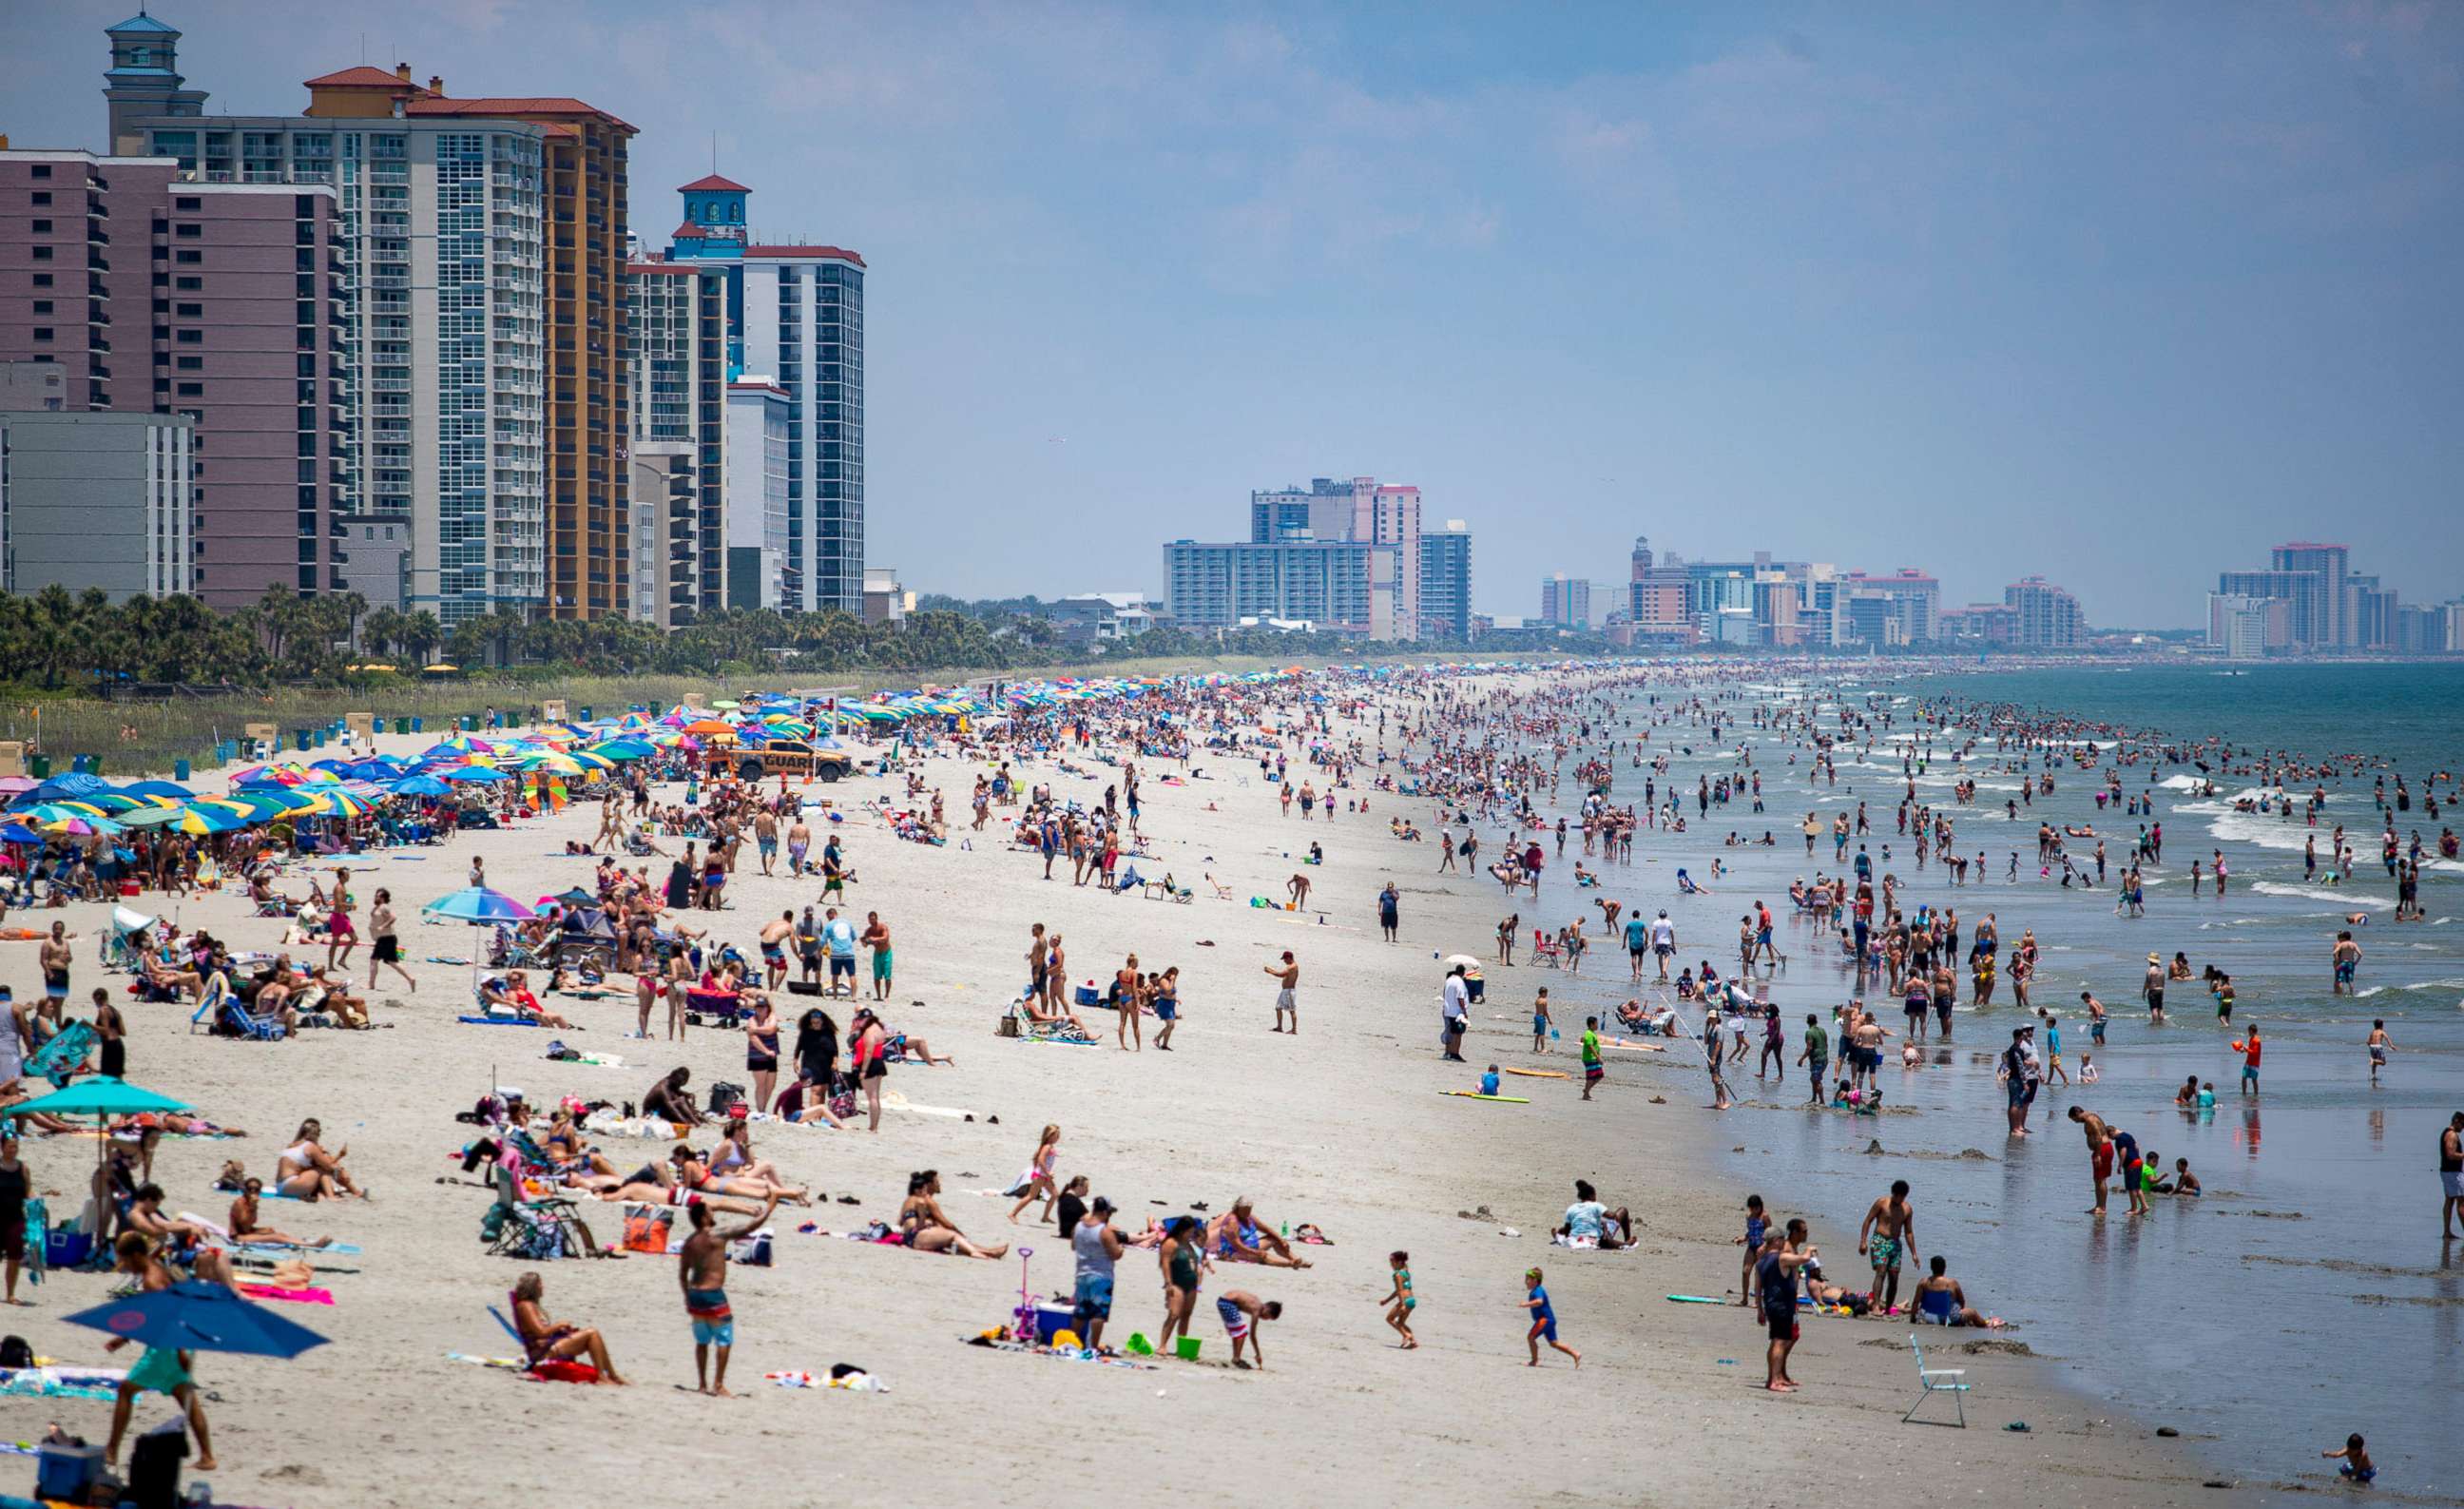 PHOTO: People fill the beach in North Myrtle Beach, S.C., July 4, 2020, as coronavirus cases continue to surge.